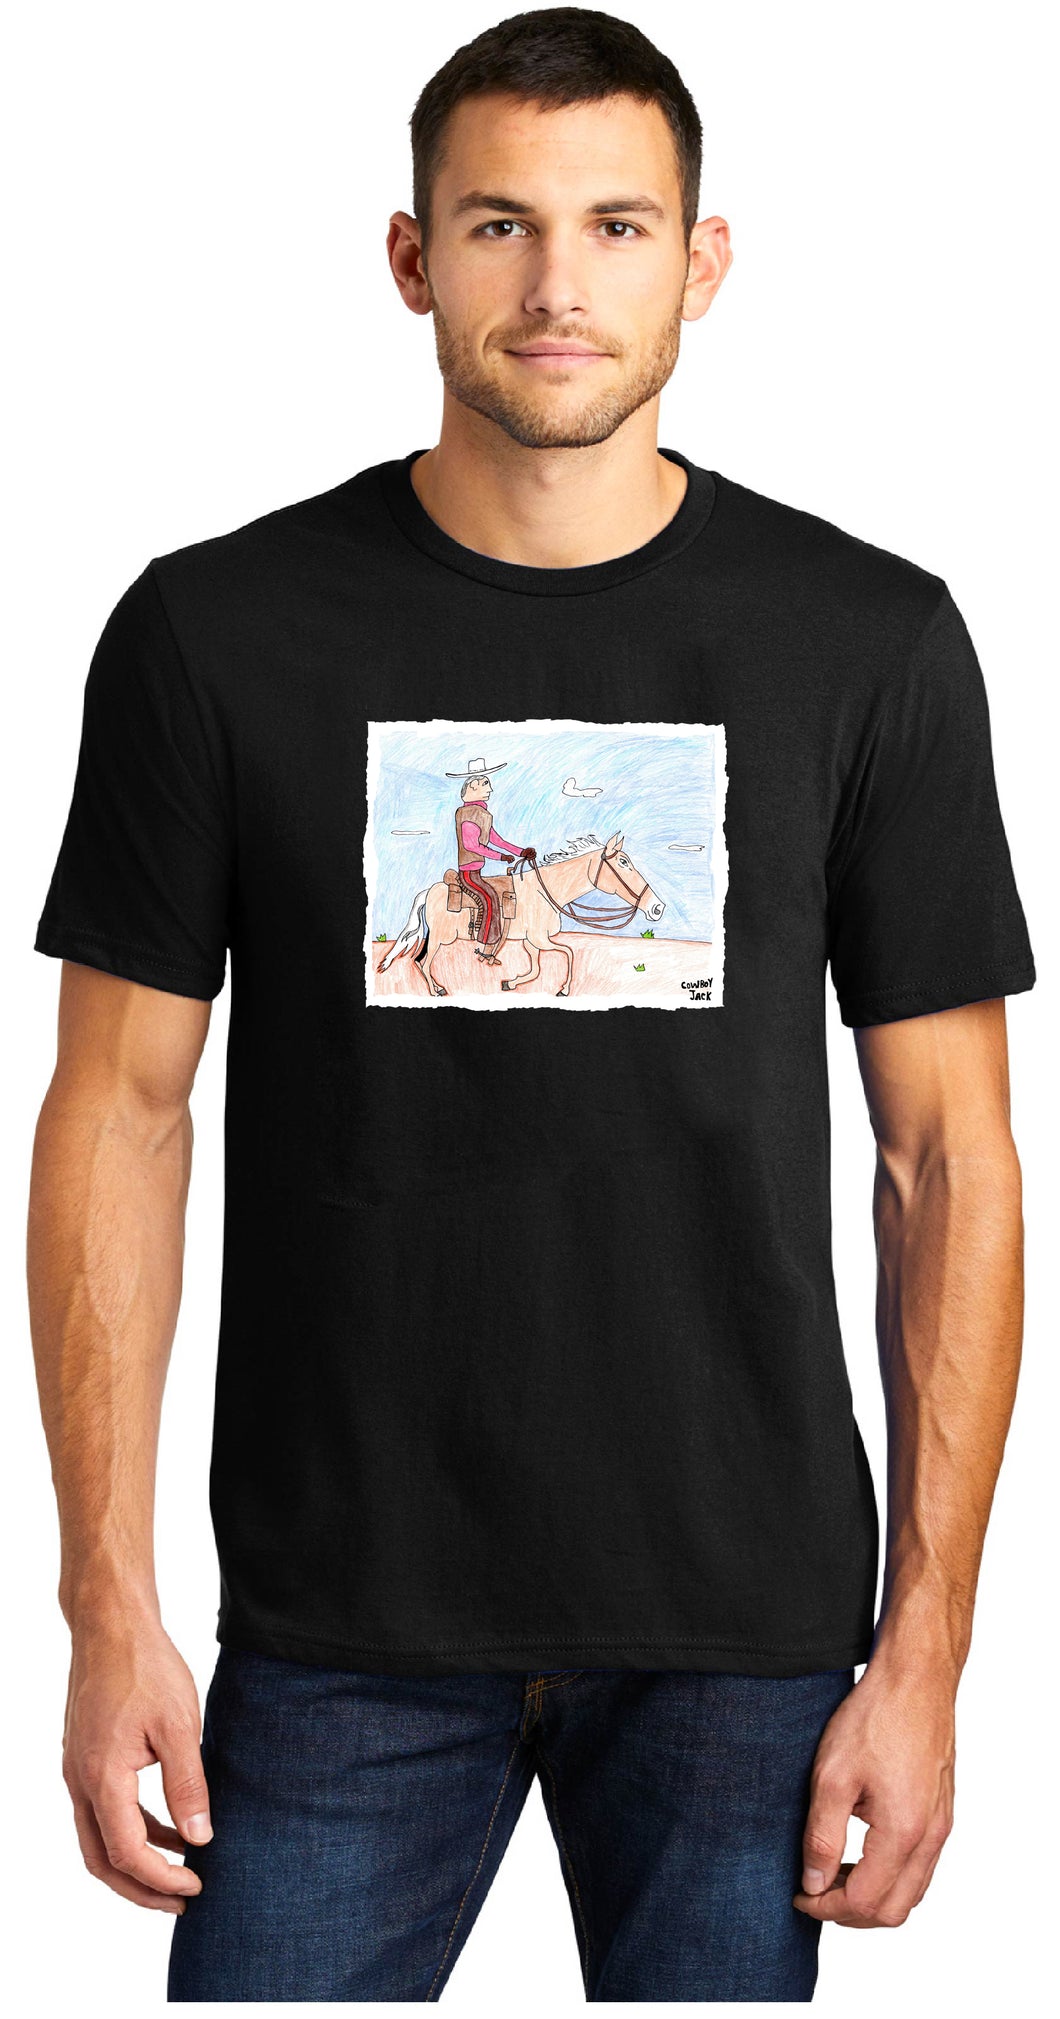 Cowboy on a Horse Side View T-Shirt